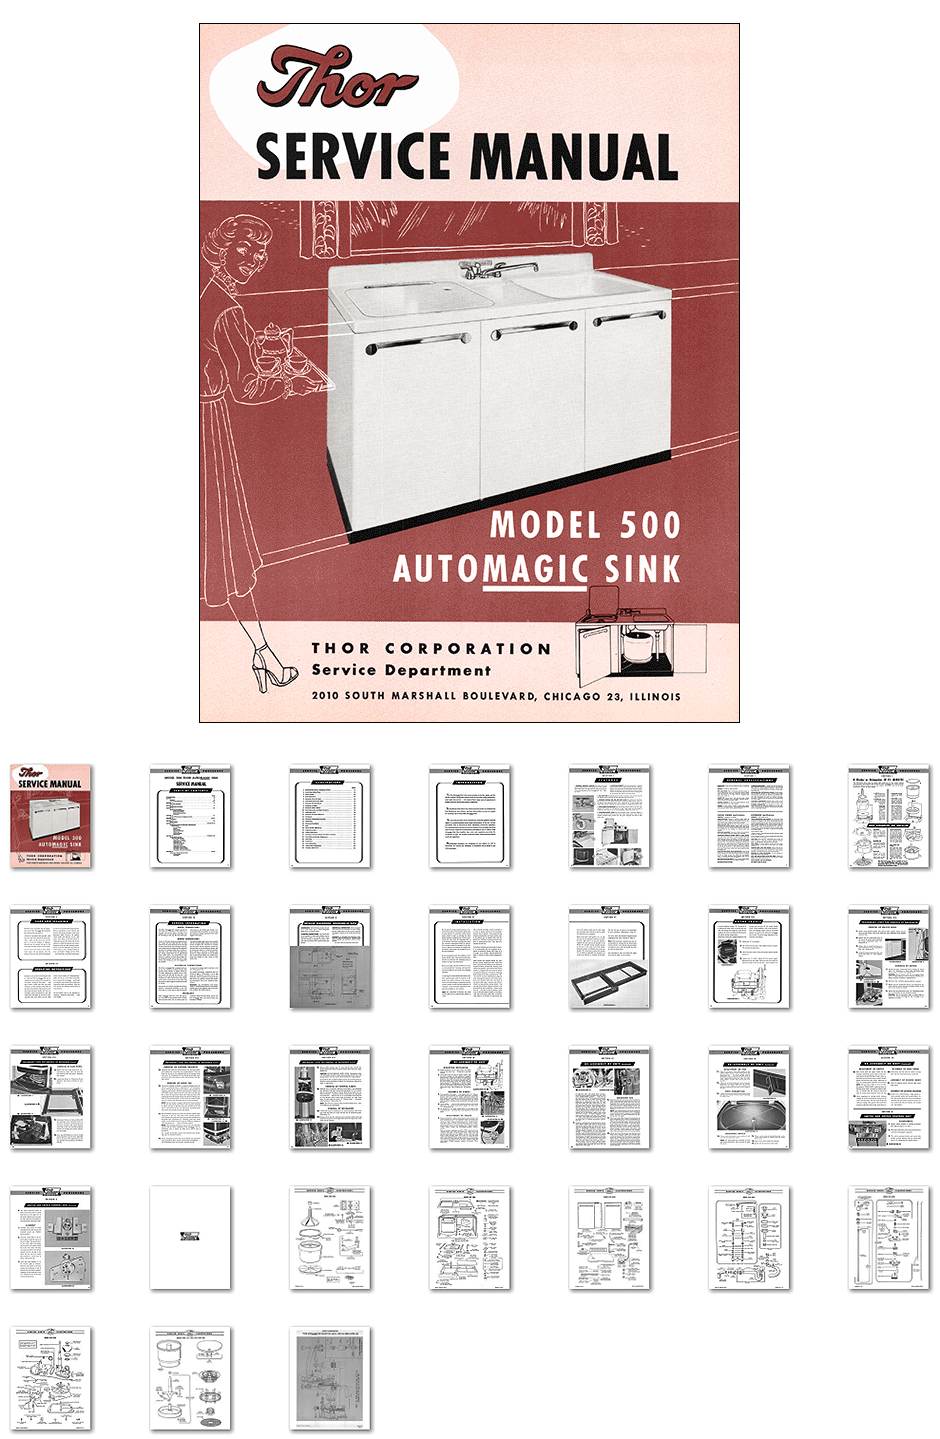 Washer Dryer Library-Thor Automatic Sink Service Manual for Lustron Homes